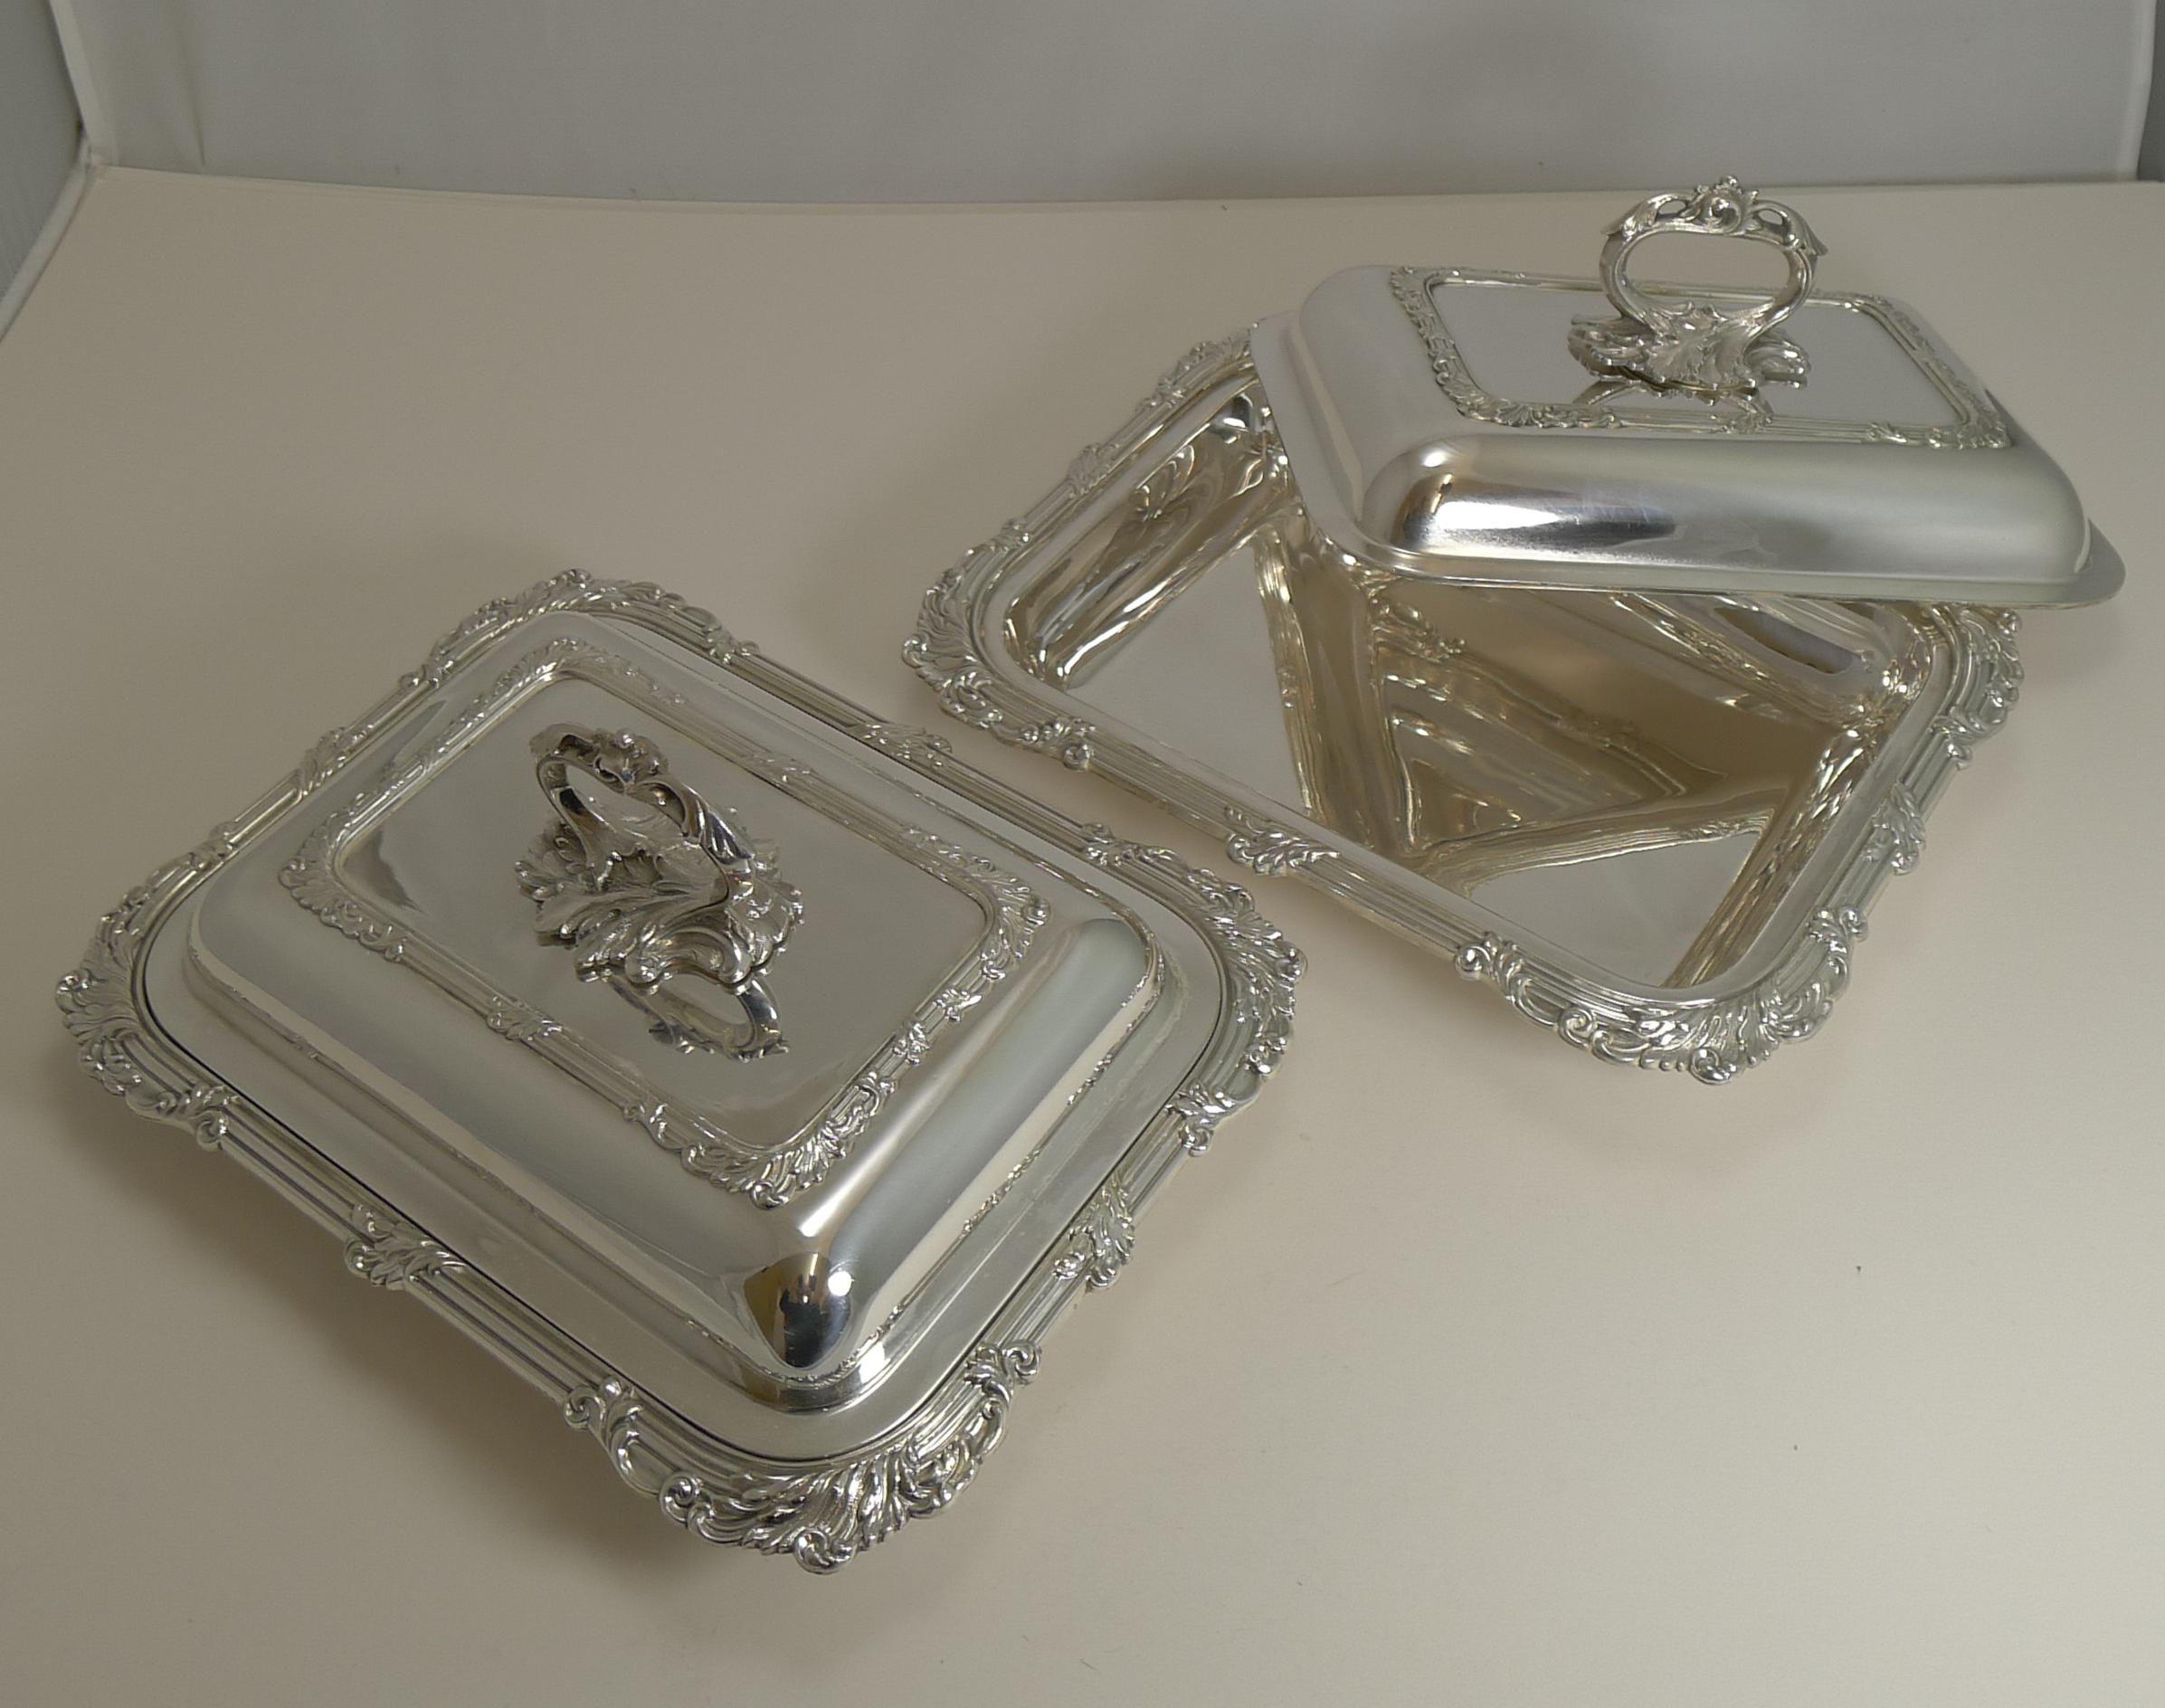 Pair of Antique English Silver Plated Entree Dishes by James Dixon & Sons 15